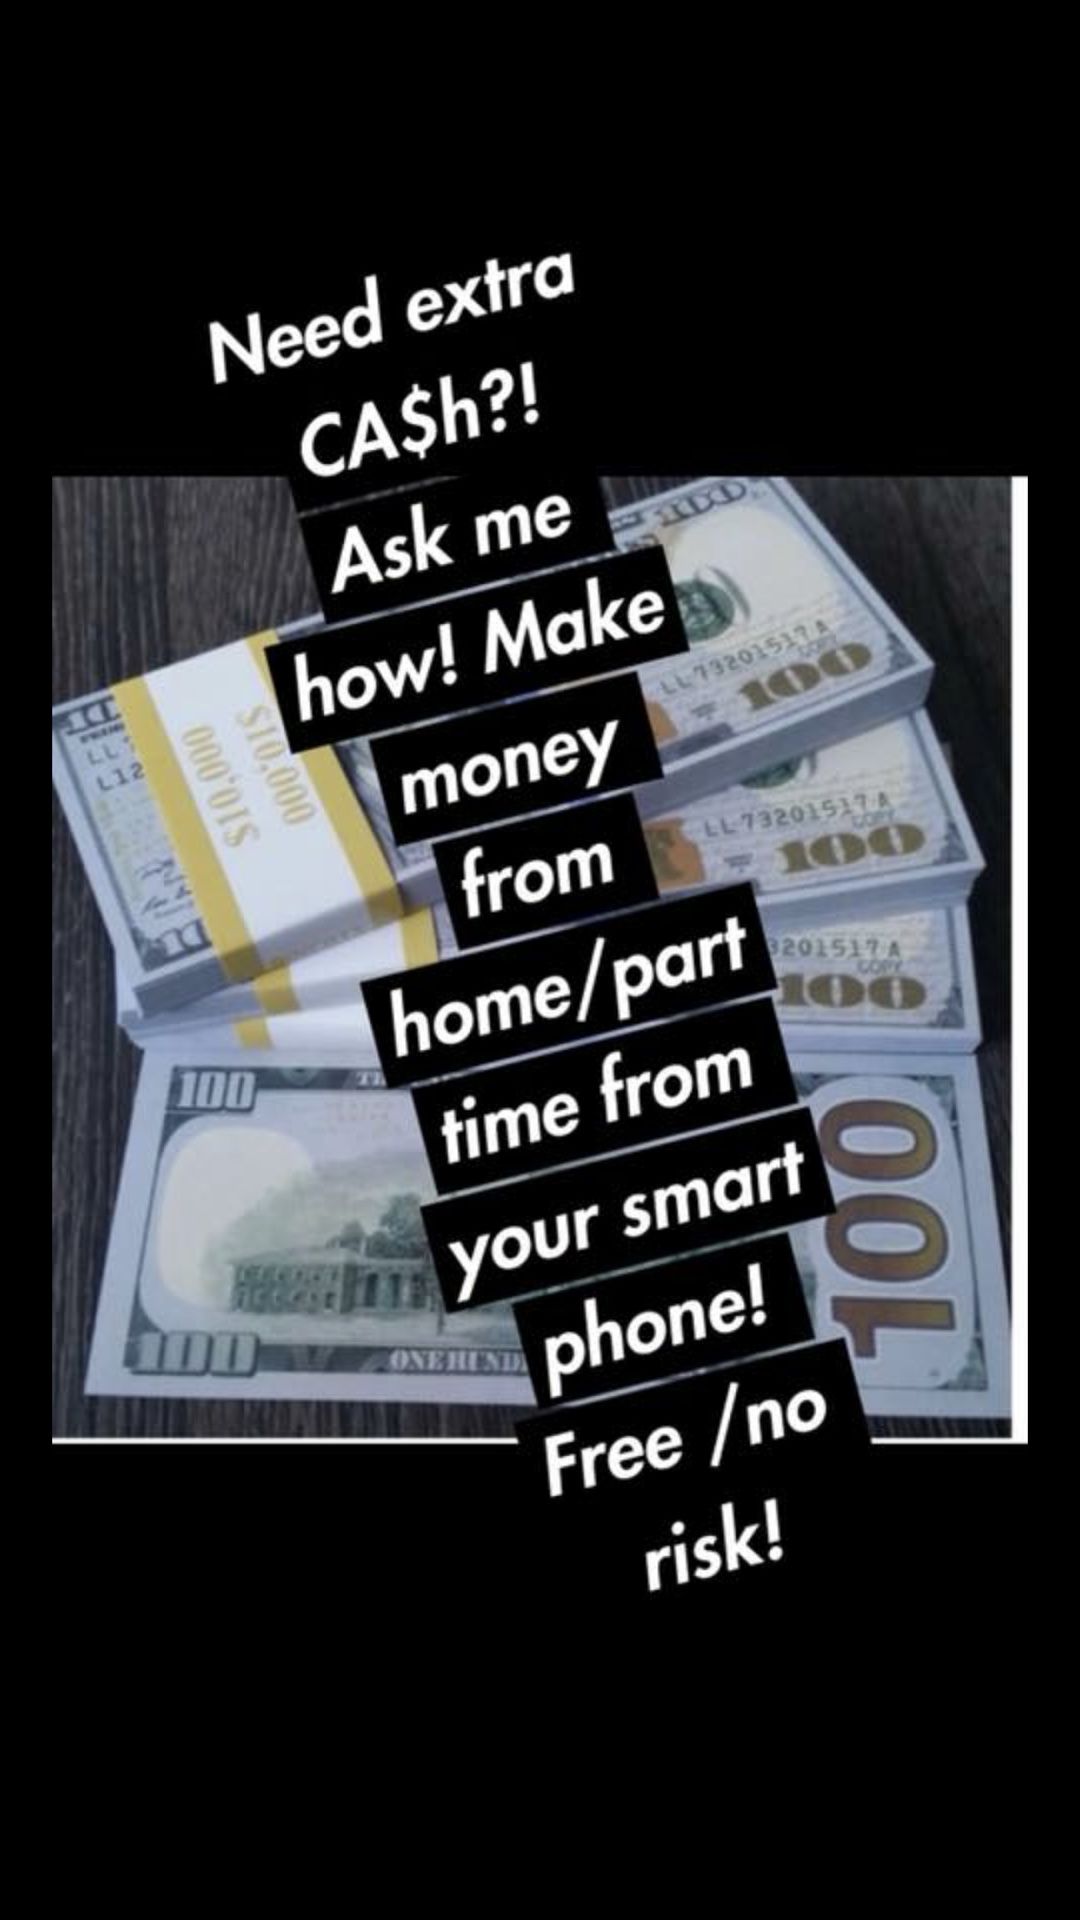 Want to make extra cash? Ask me how